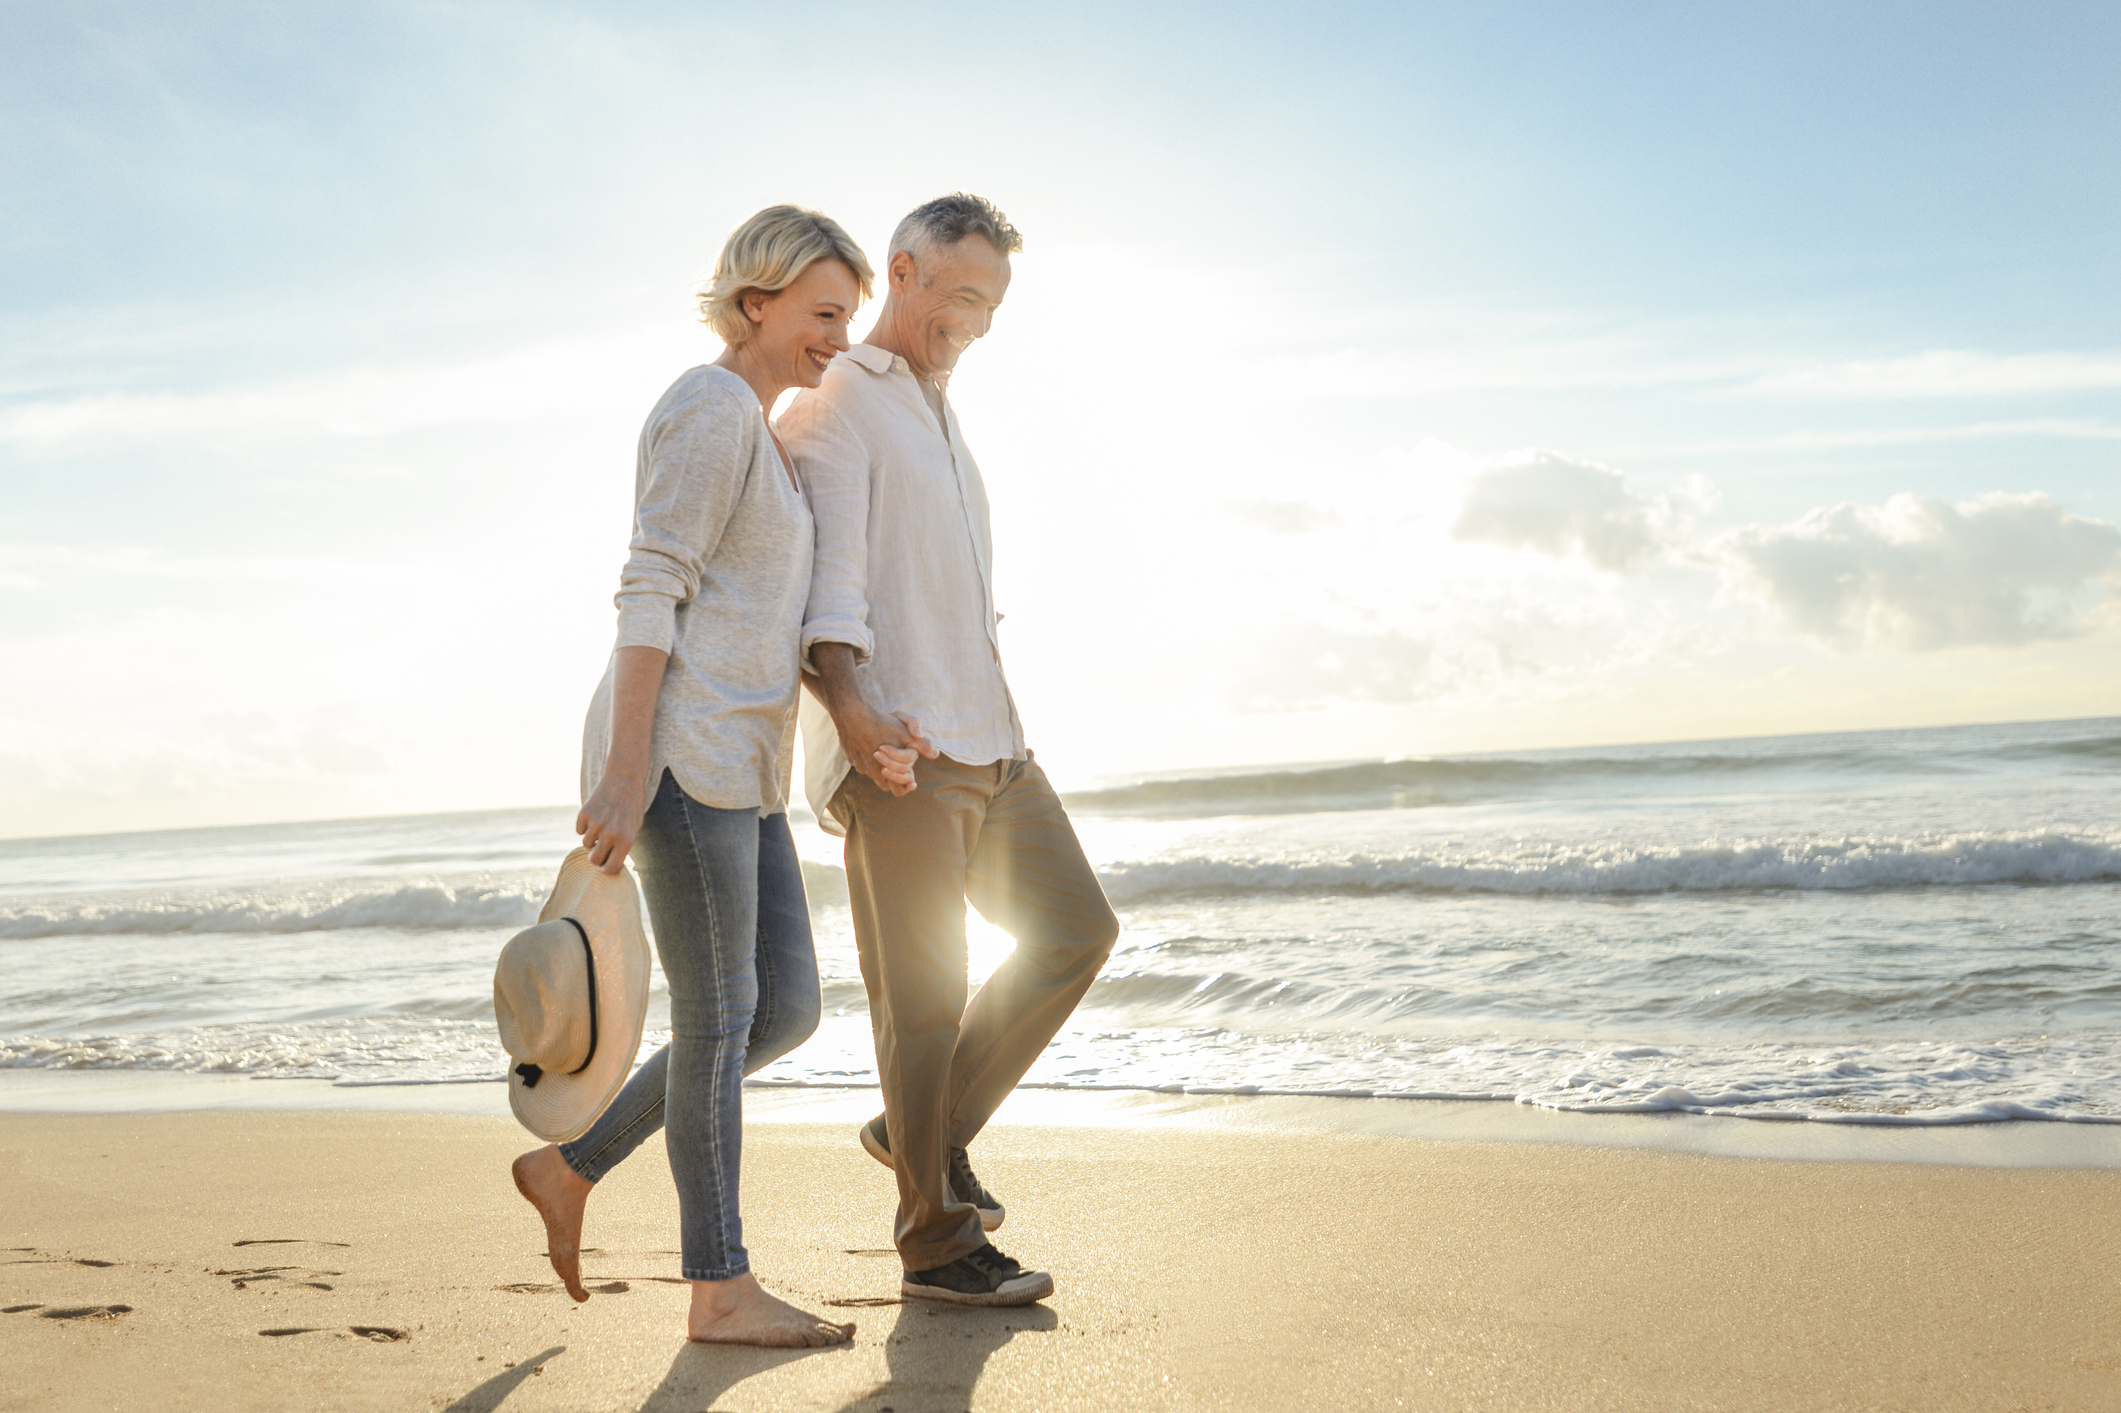 Couple strolling on the beach - Myrtle Beach Attractions for Couples